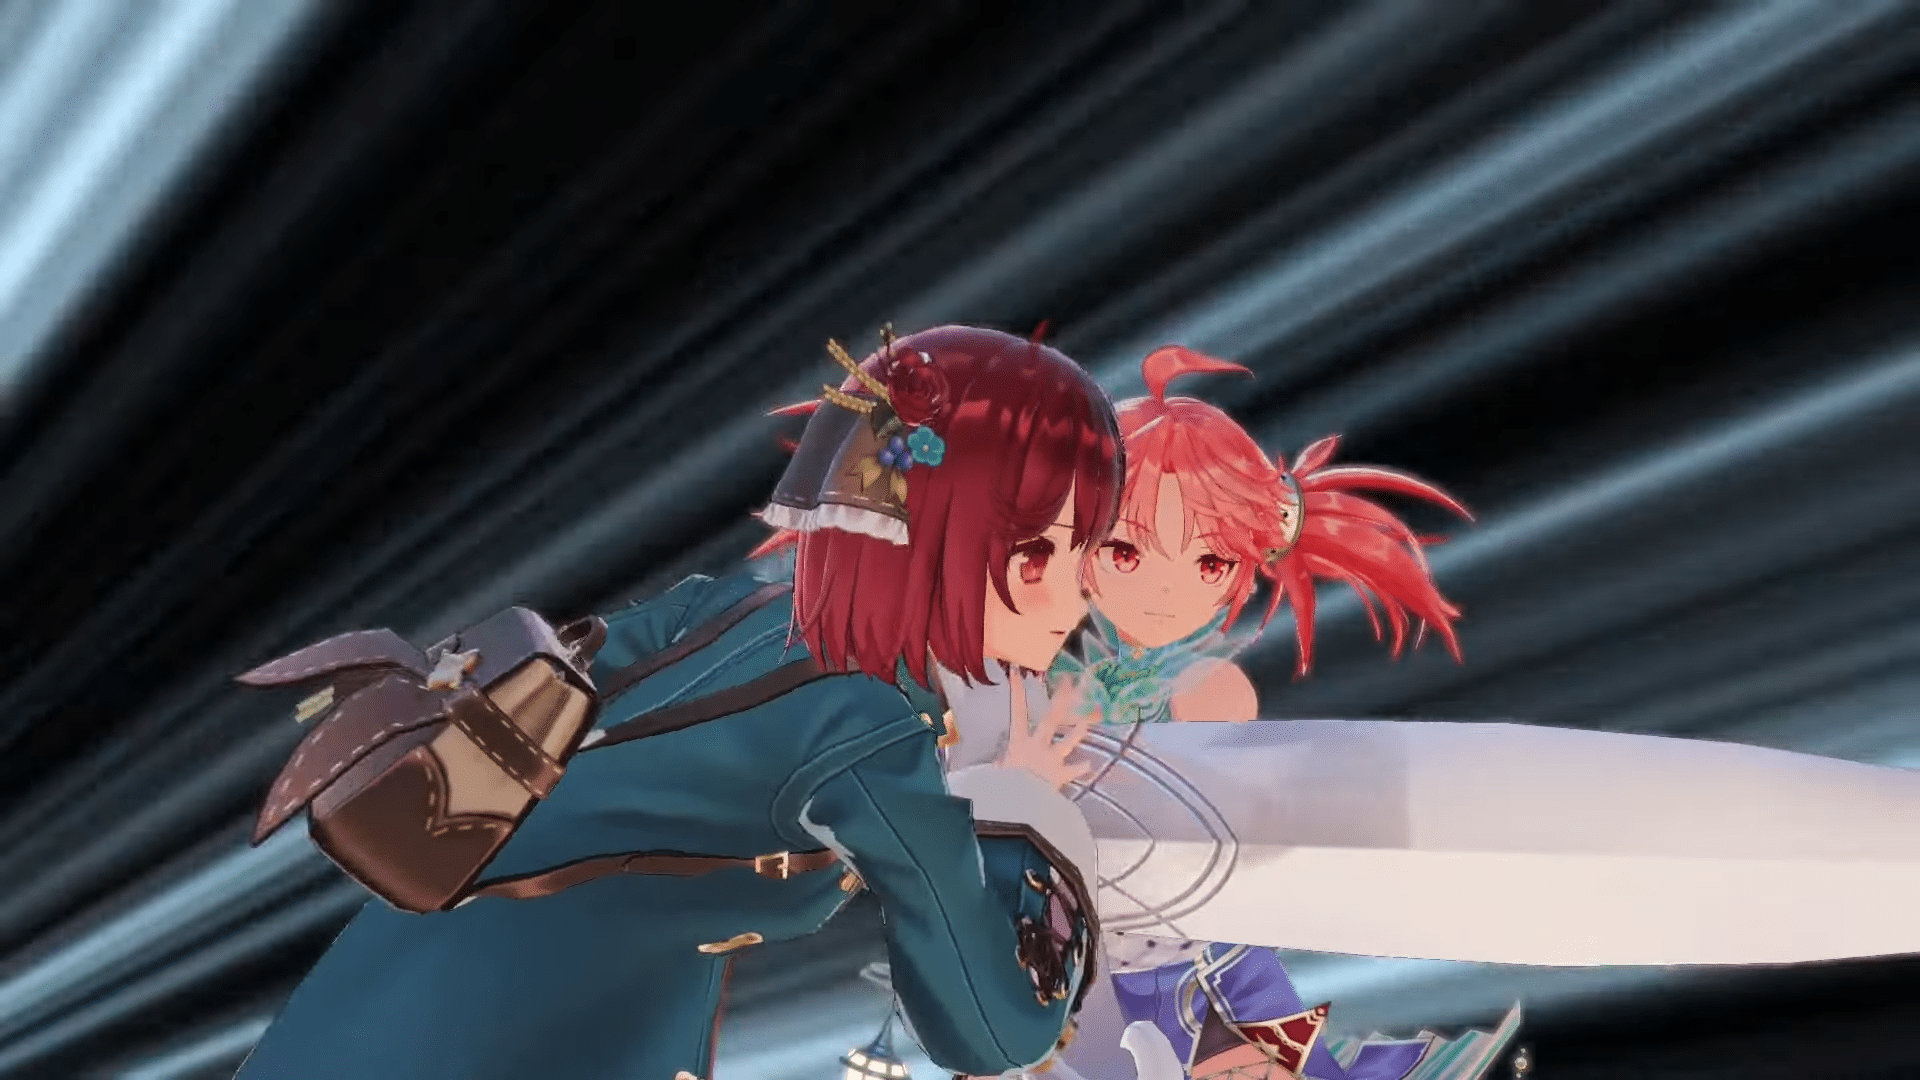 Atelier Sophie 2 Shares Combat & Photo Mode Trailers